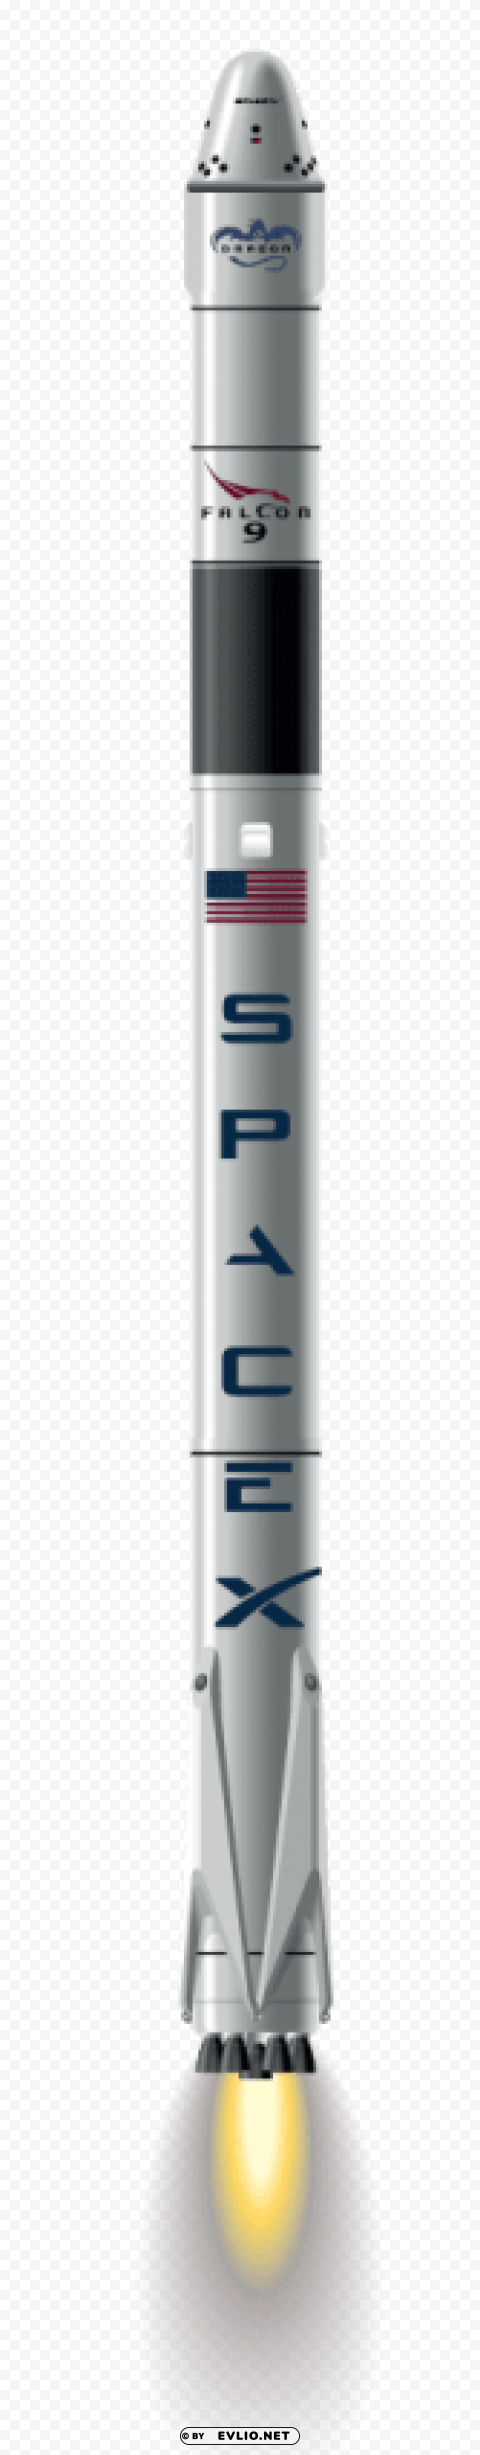 spacex rocket PNG files with clear backdrop assortment